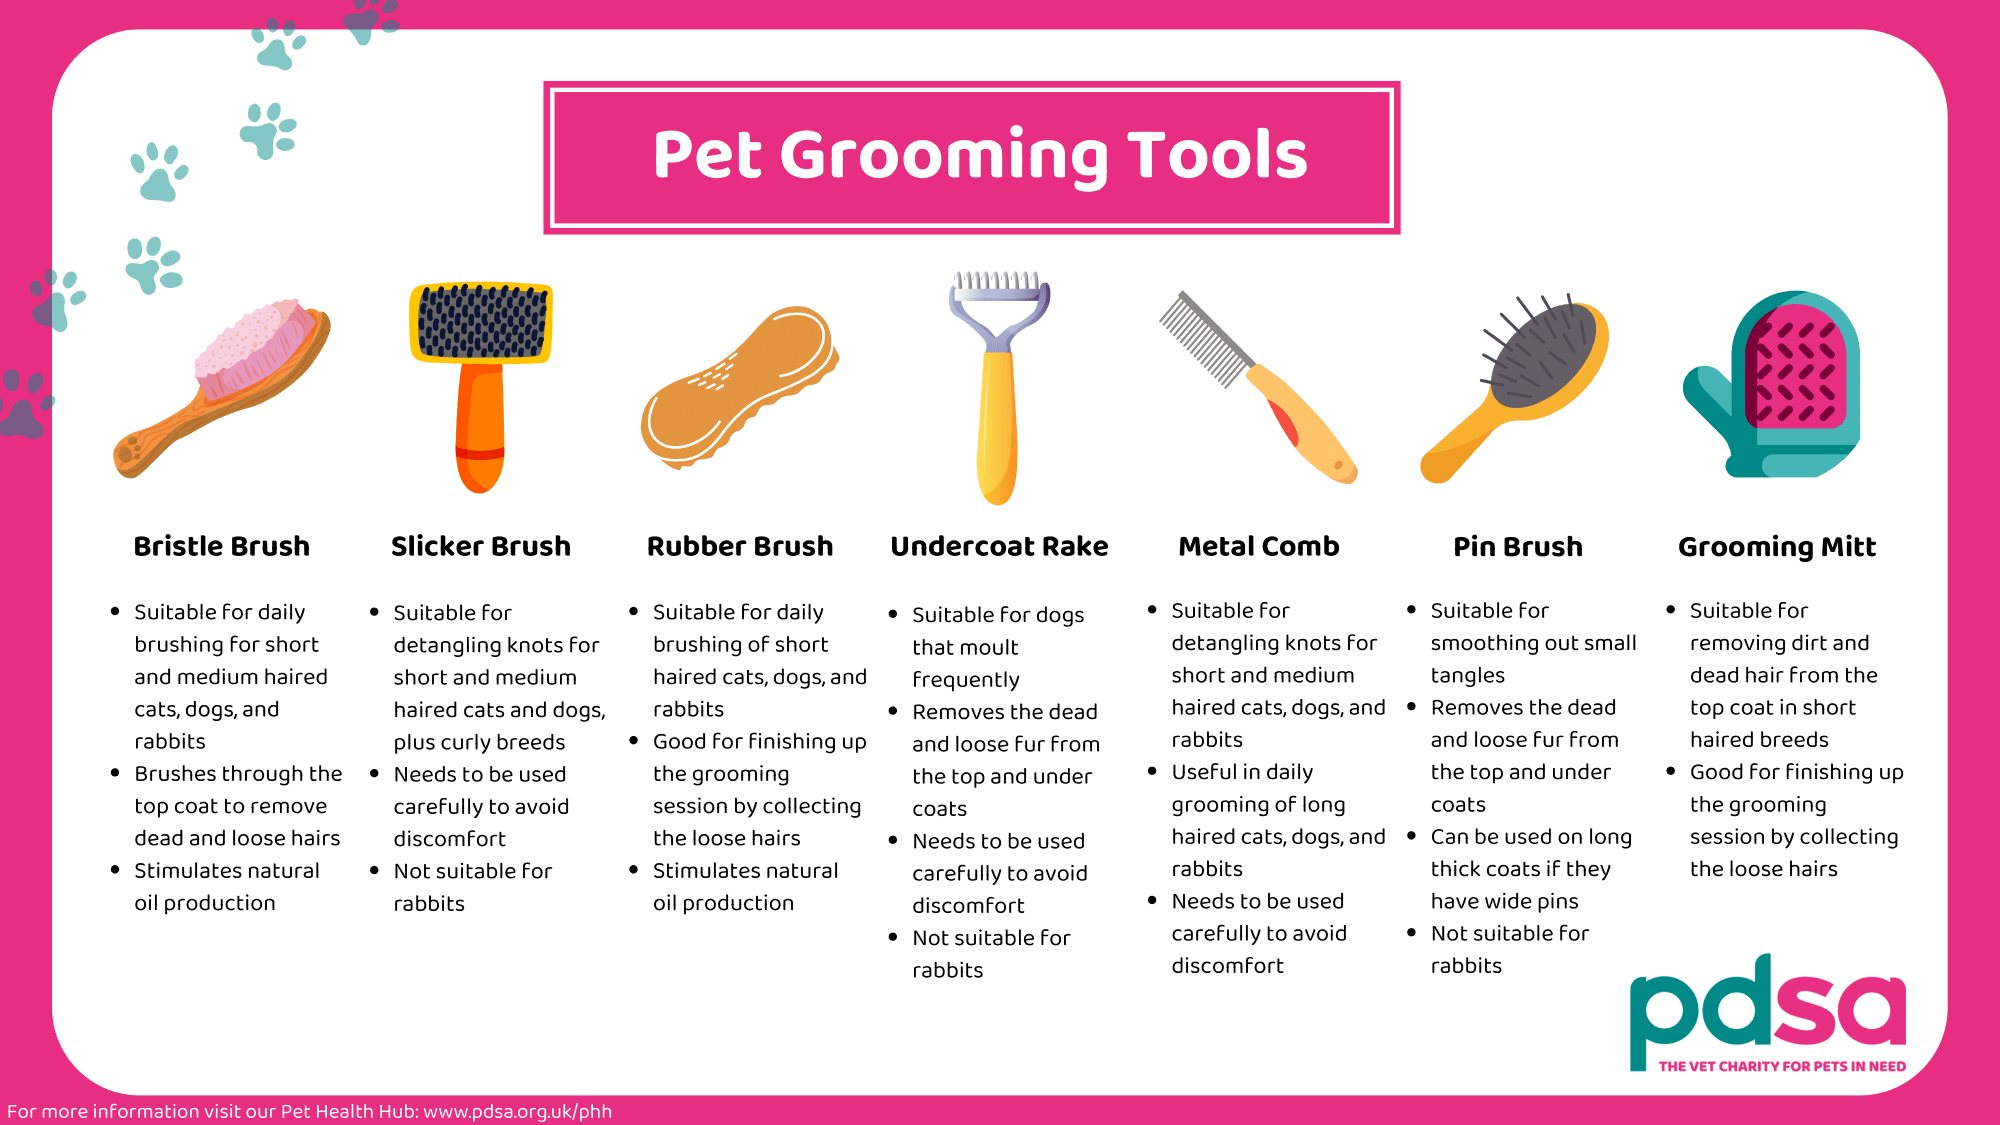 An infographic showing different types of pet grooming tools